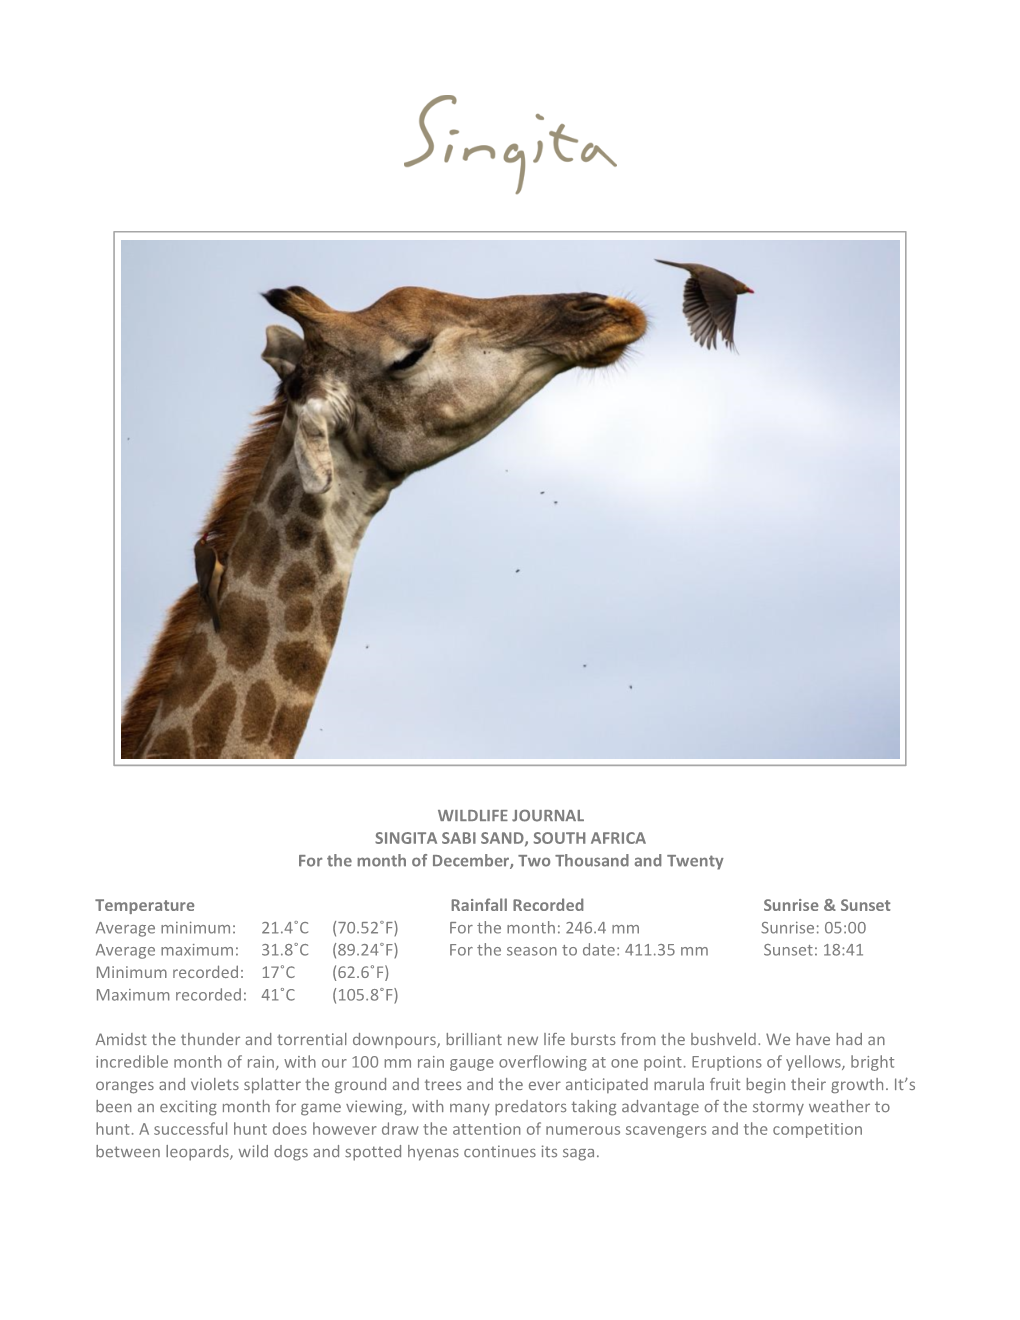 WILDLIFE JOURNAL SINGITA SABI SAND, SOUTH AFRICA for the Month of December, Two Thousand and Twenty